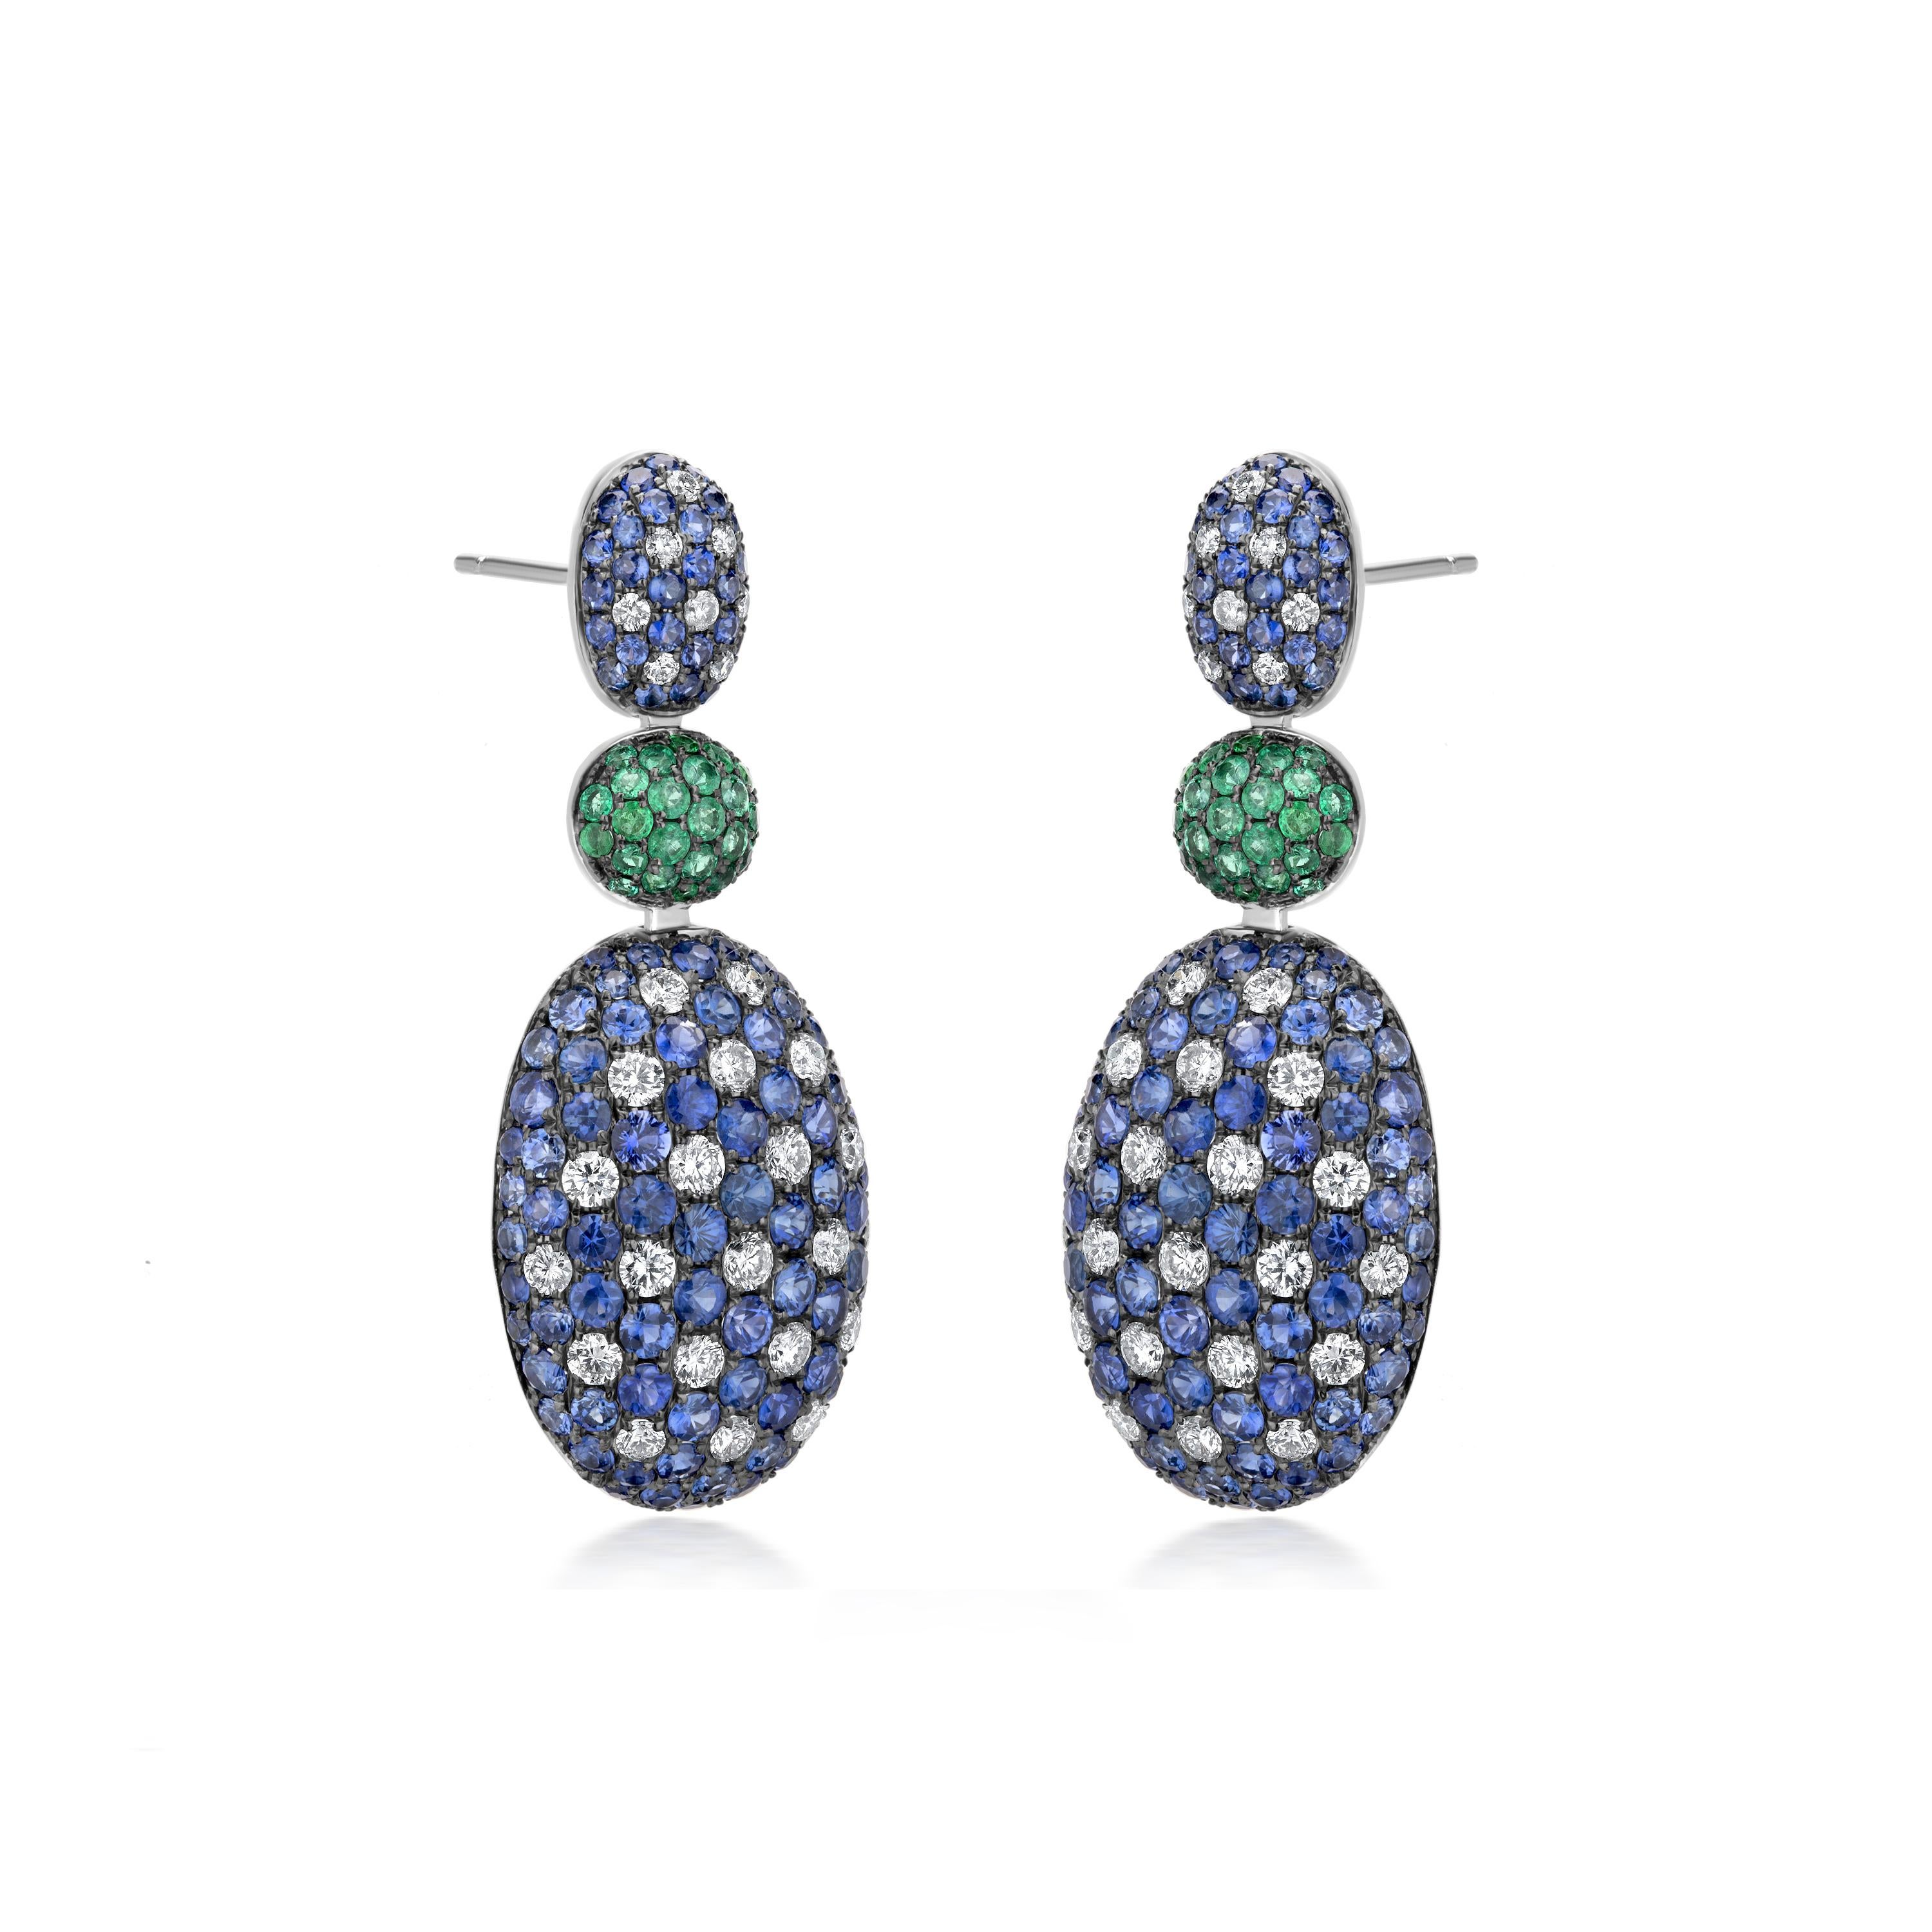 The three-tiered earring has a fantastic design by Nigaam, with an oval surmount attached to an emerald-studded circle on the second layer, and diamonds with blue sapphire on the third layer. It has a push-button closure. Its attractiveness is